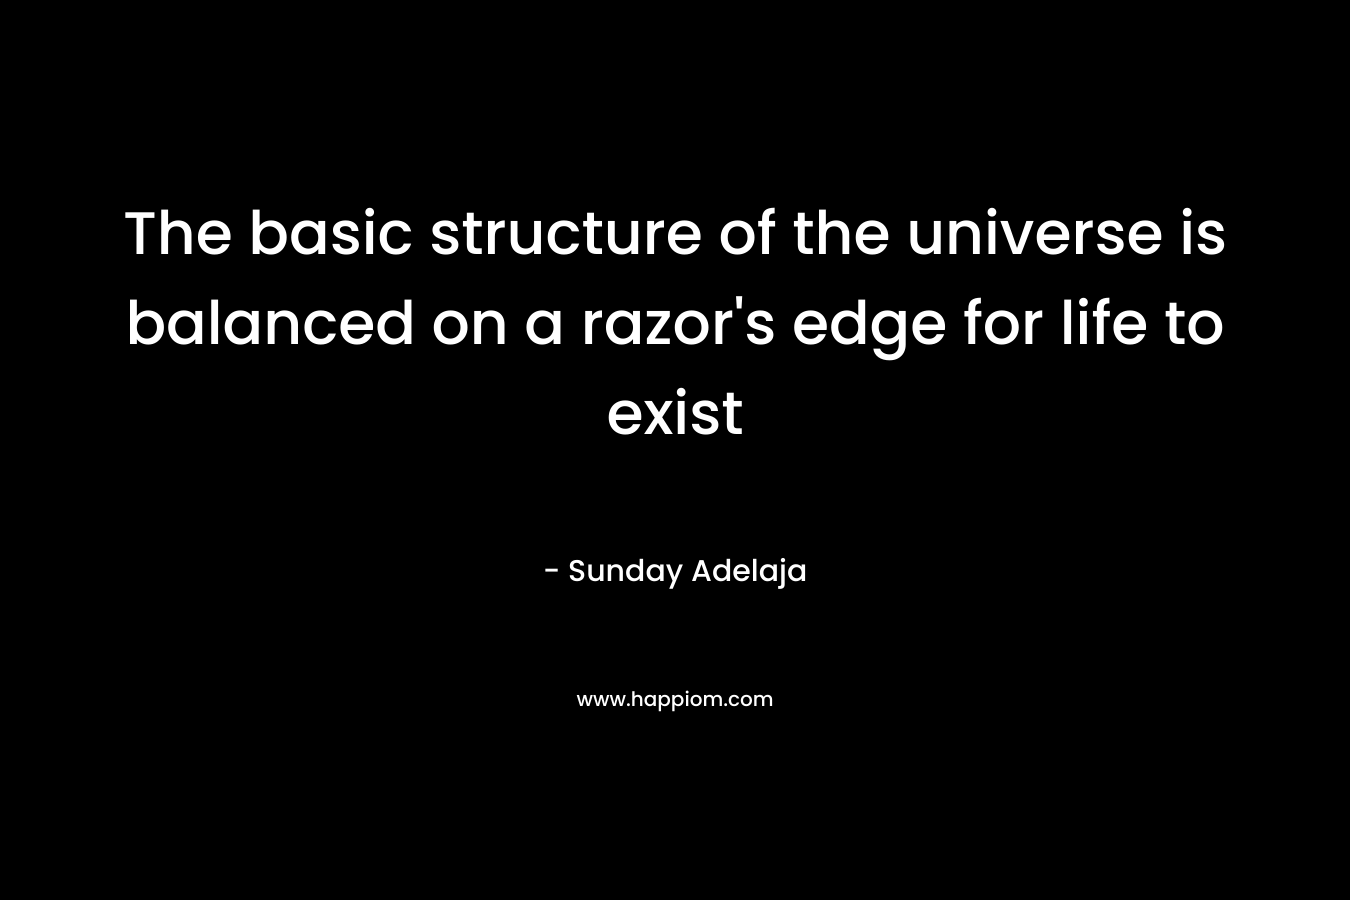 The basic structure of the universe is balanced on a razor's edge for life to exist